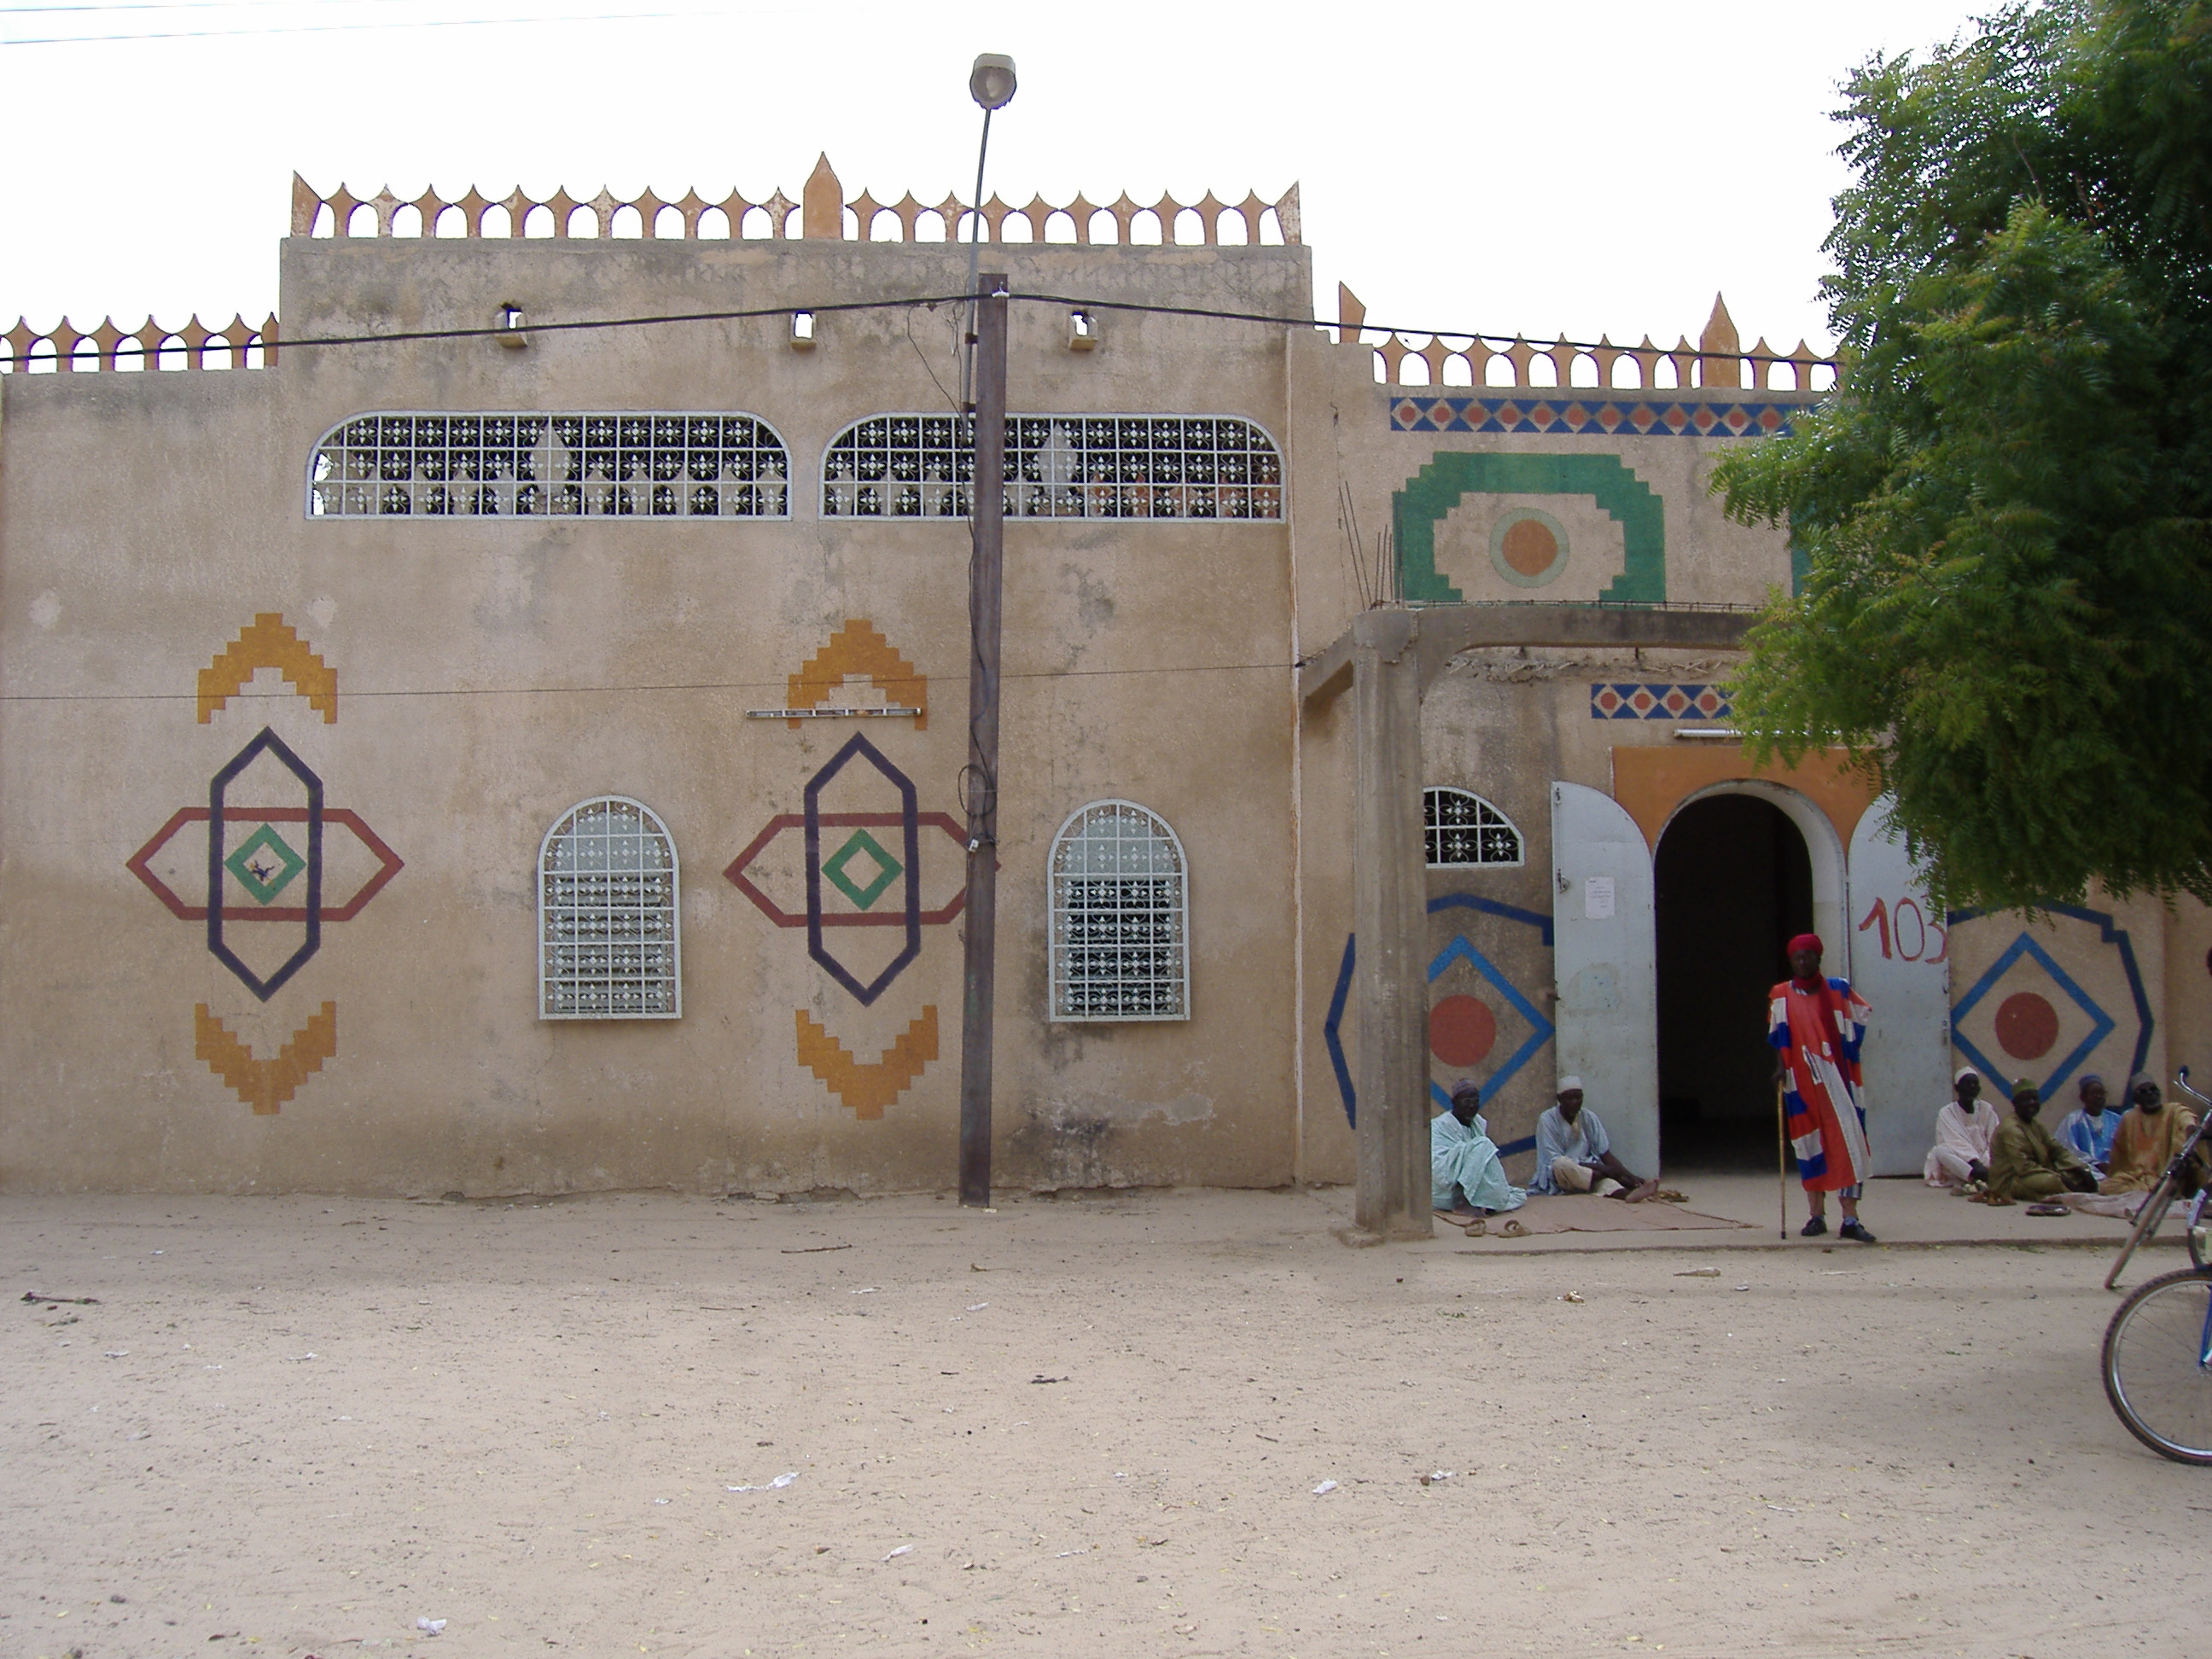 Sultan's palace, Niger